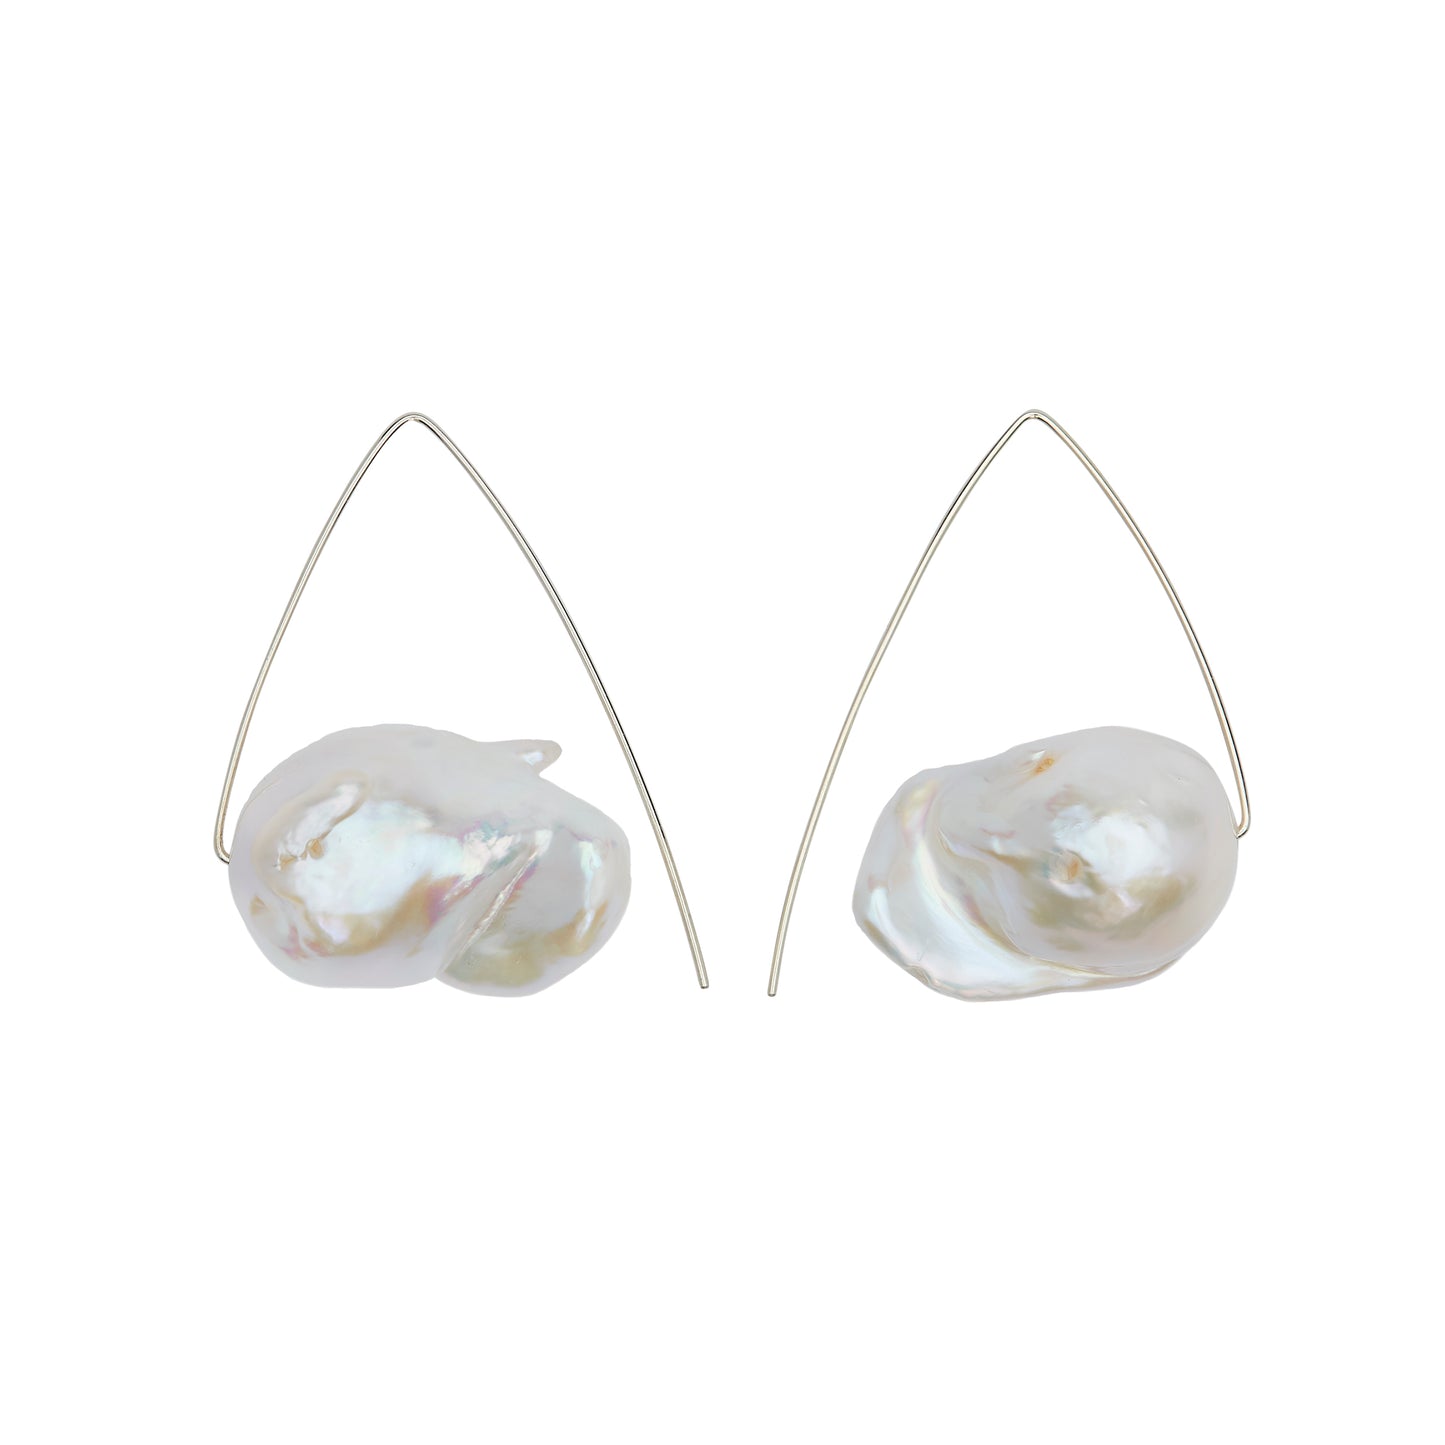 Medium Triangle Hoops with White Fresh Water Baroque Pearl